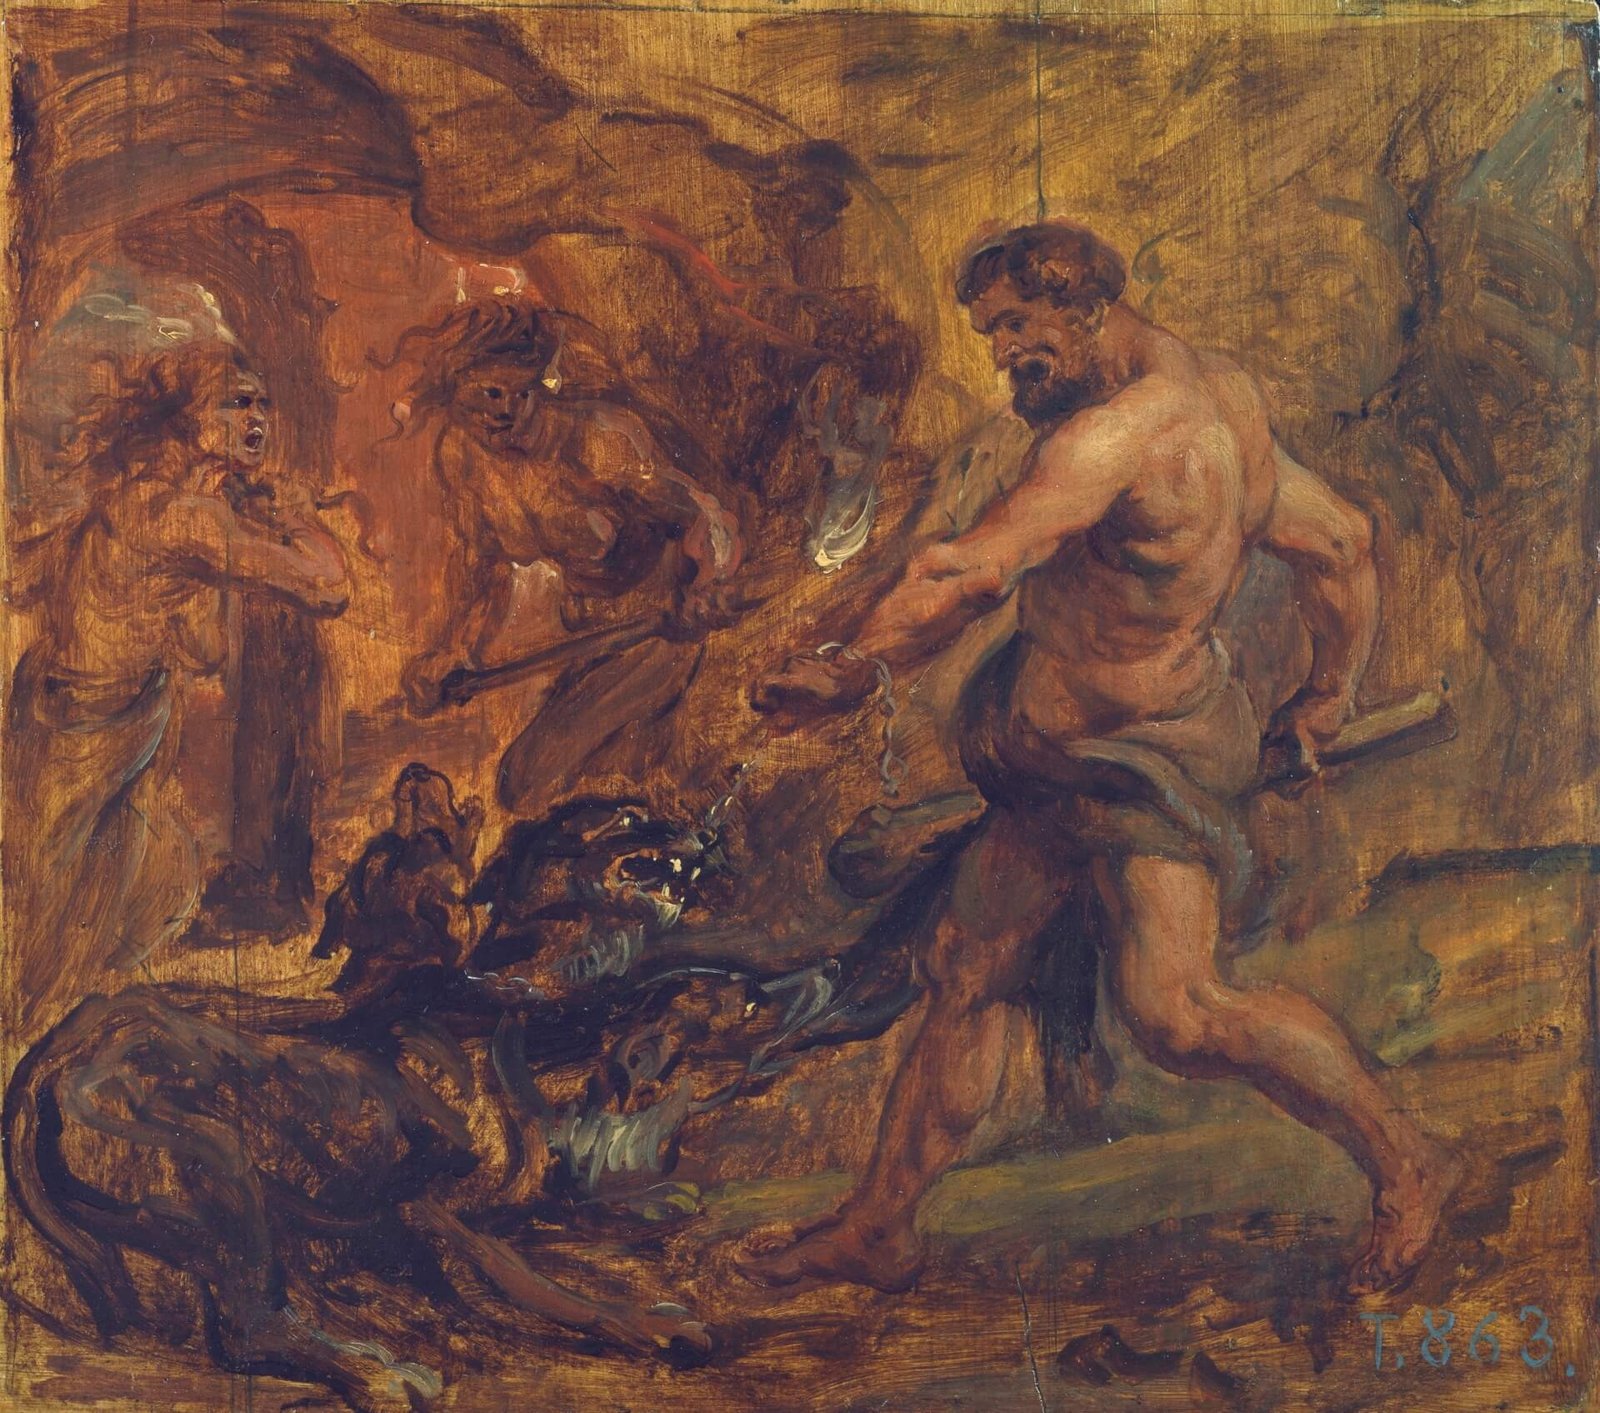 This painting represents one of the legendary Greek heroes, named Heracles. He is fighting against Cerberus in the kingdom of Hades.